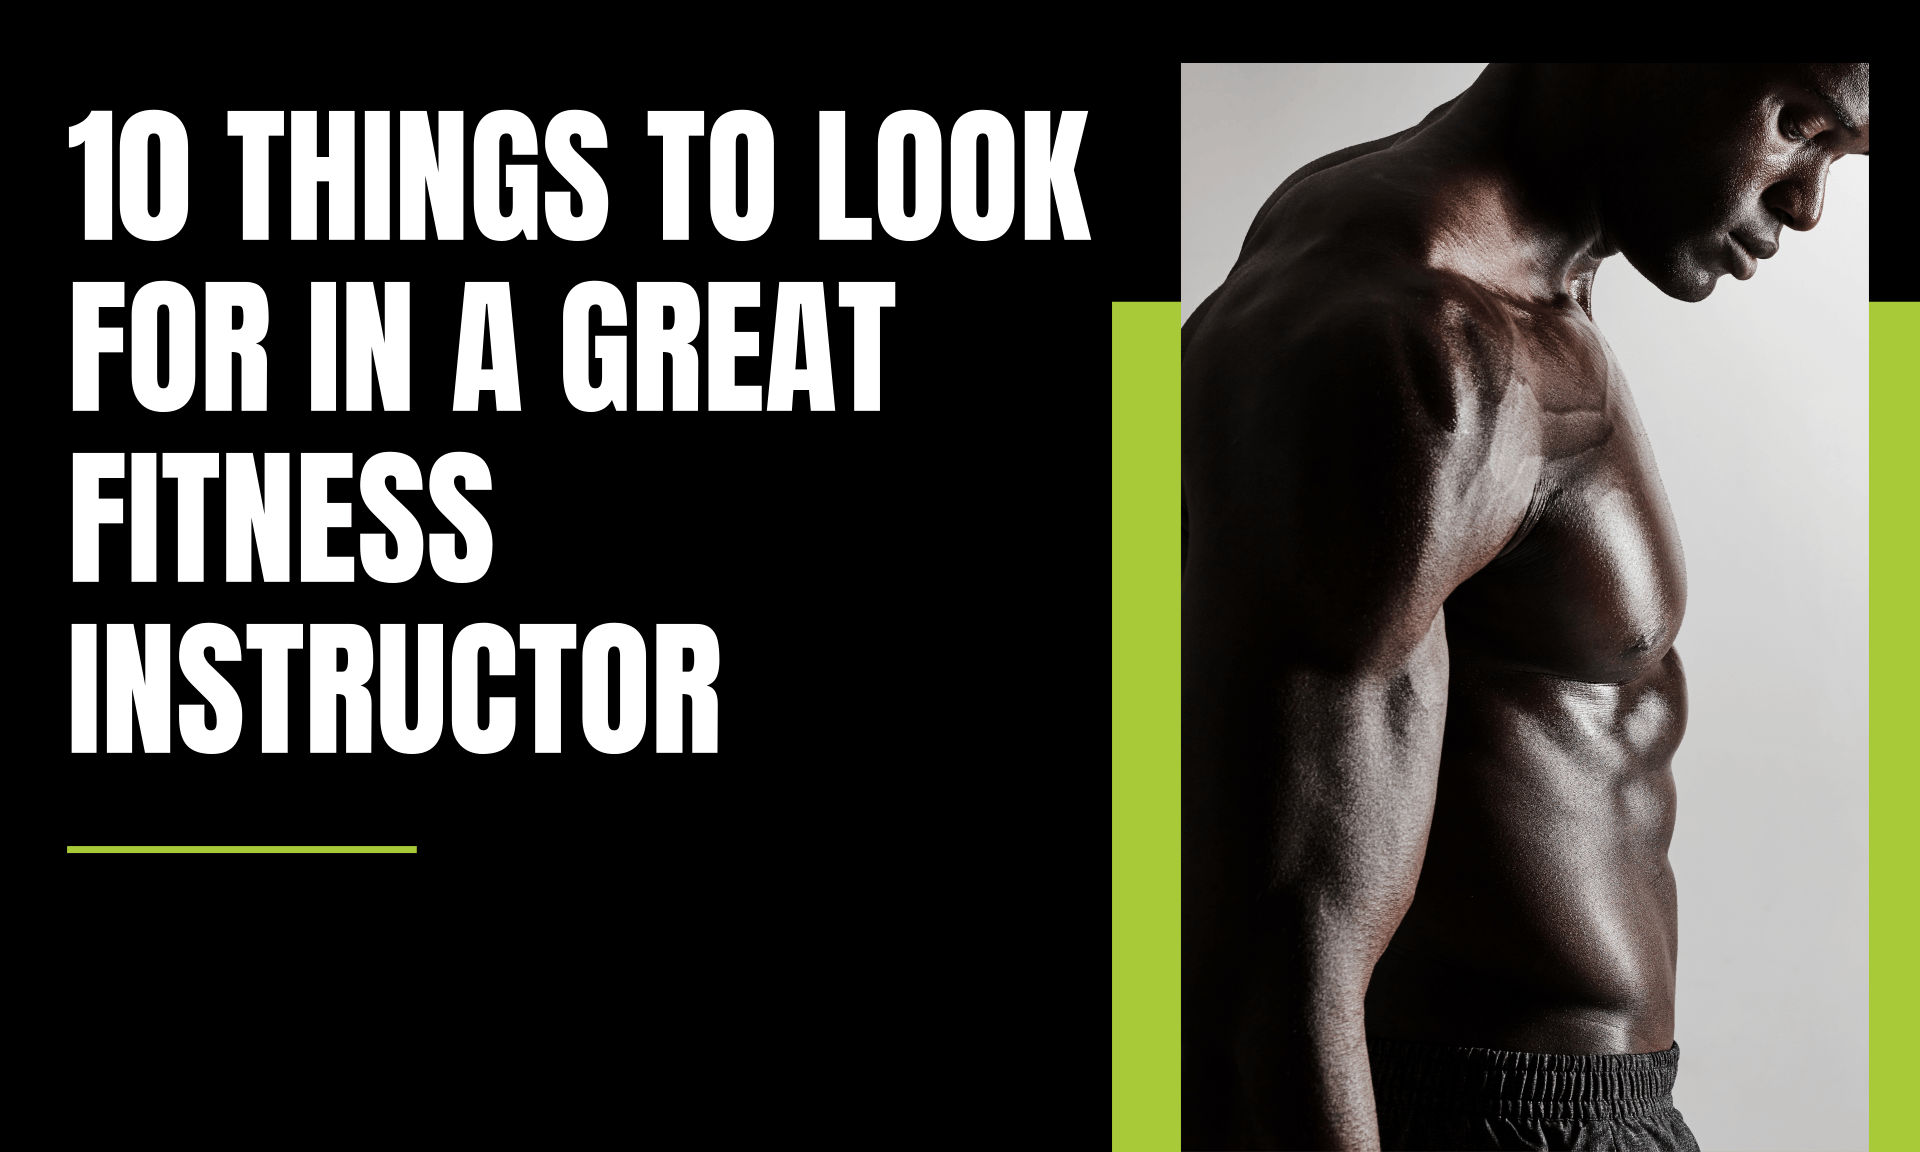 Things to look for in a great fitness instructor